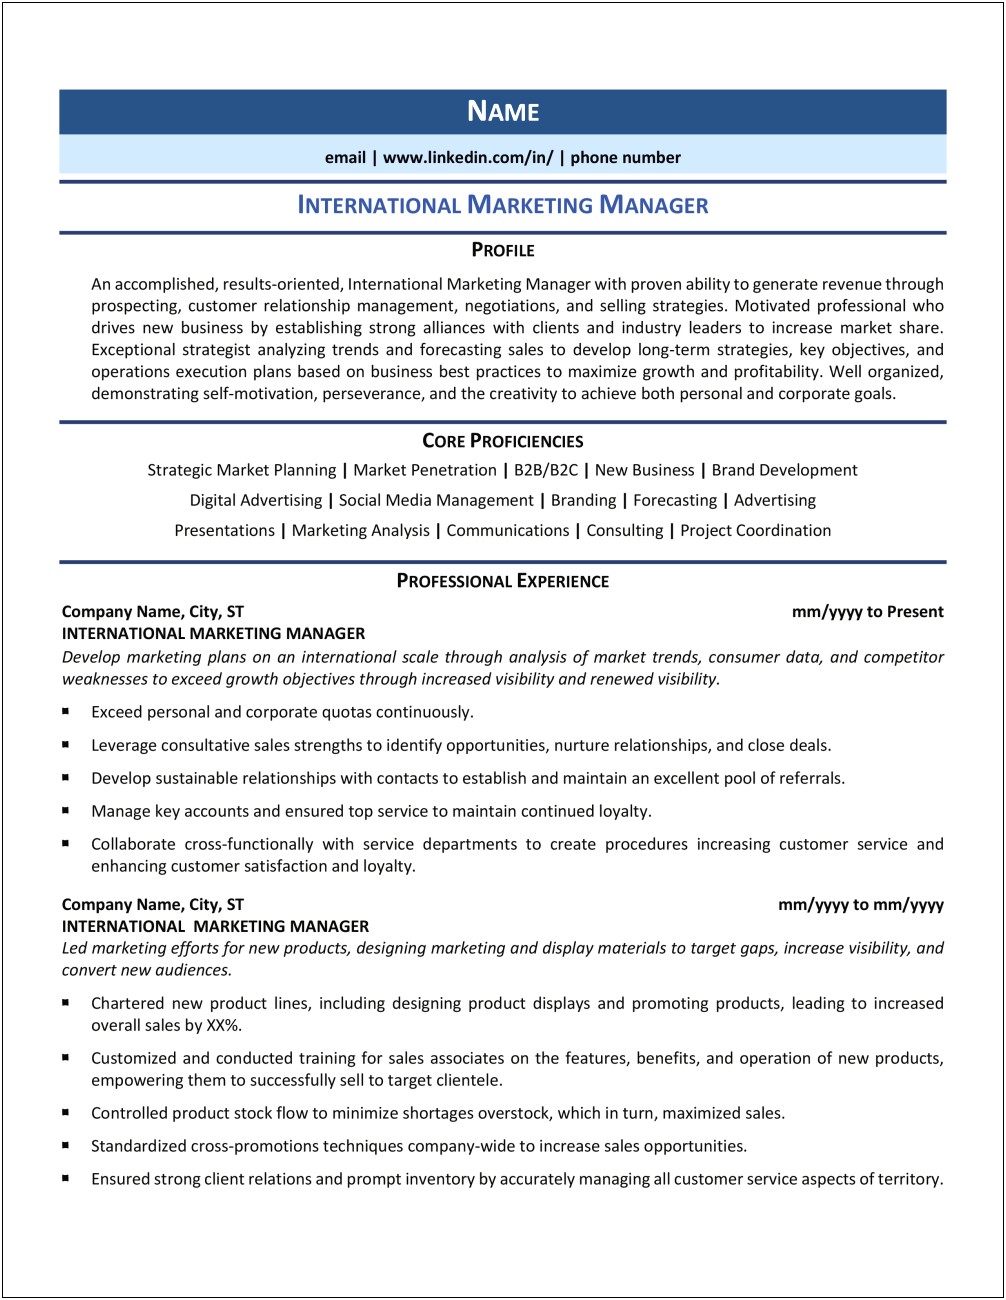 Resume Of Sales And Marketing Manager